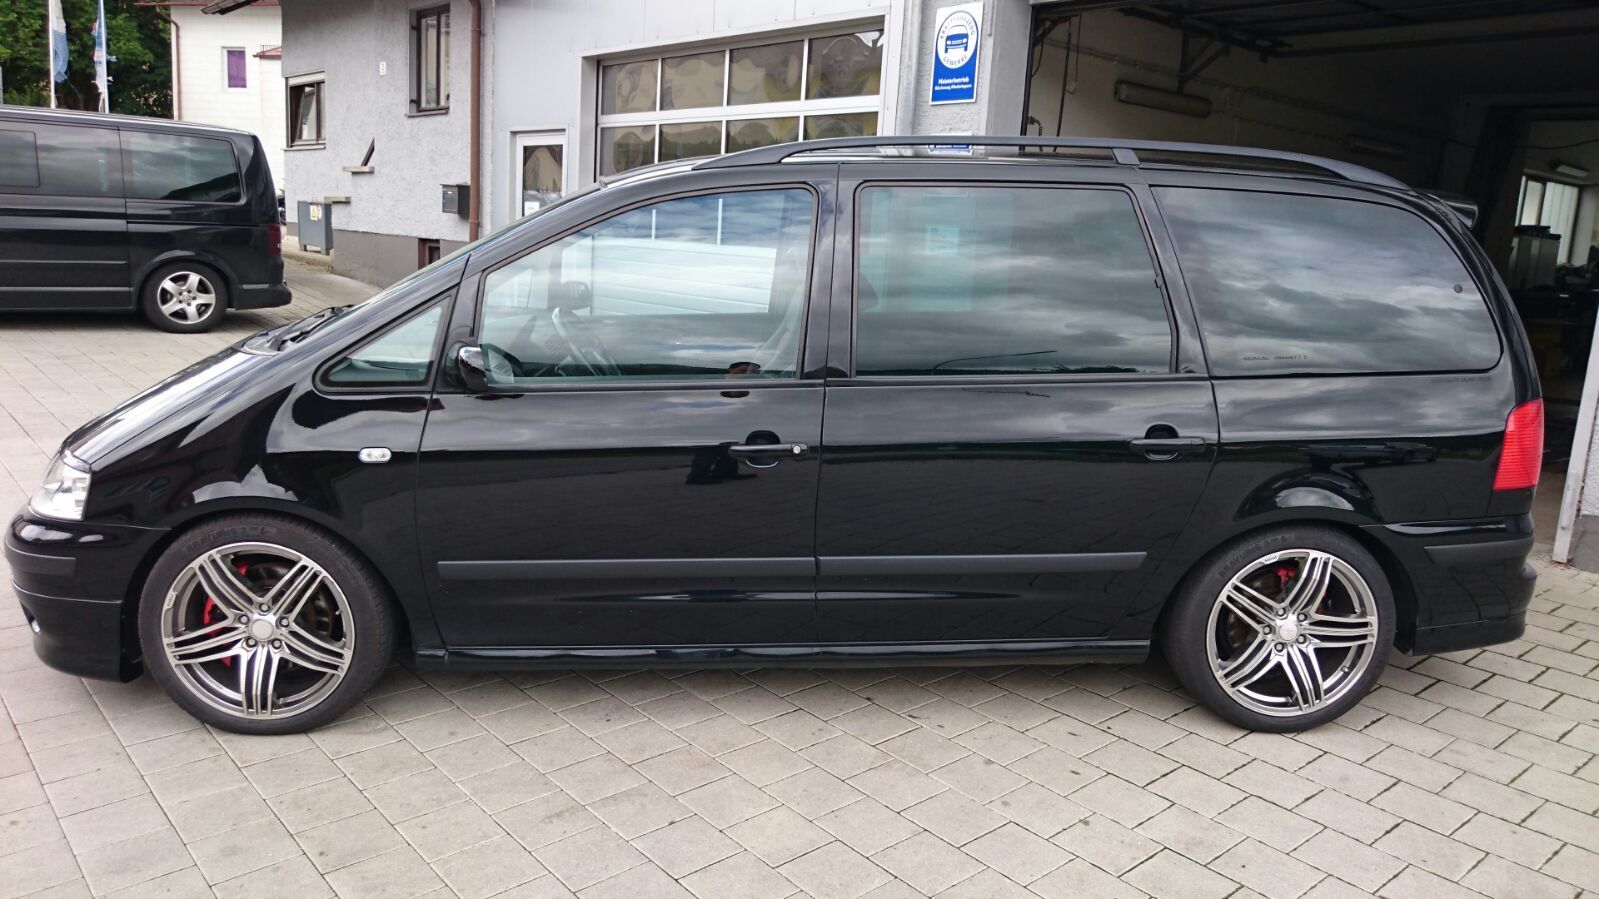 Volkswagen Sharan Tuned to 440 PS Thanks to Turbo-fed 2.8-liter V6 is For  Sale - autoevolution